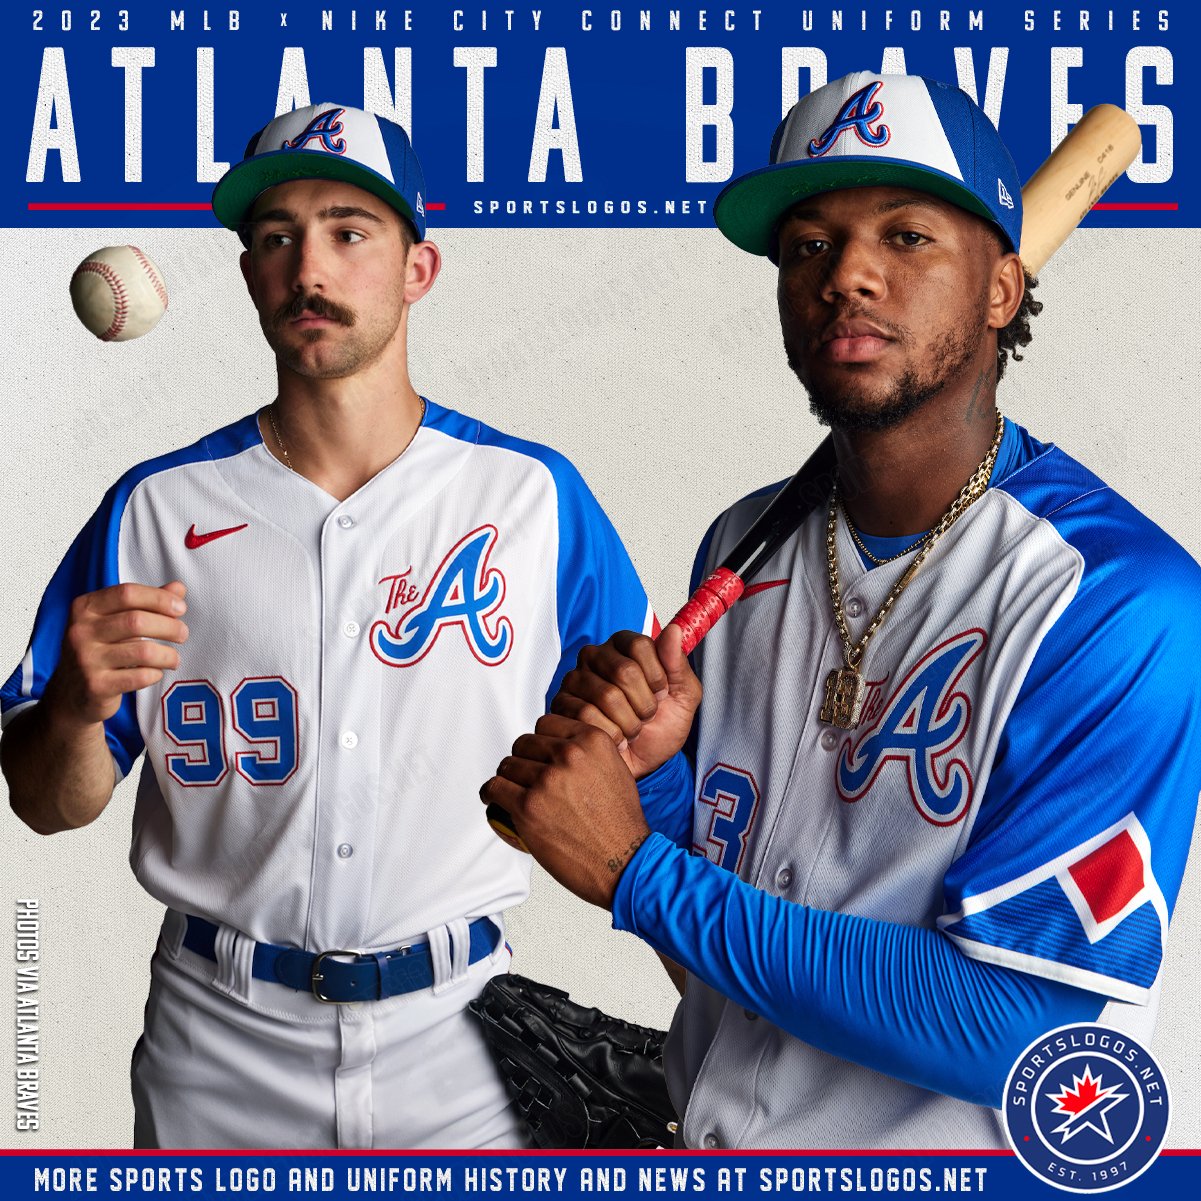 Chris Creamer  SportsLogos.Net on X: For the A and the Hanmer. Atlanta  Braves unveil brand new 2023 Nike MLB City Connect uniforms. #Nike #Braves # MLB #CityConnect Story, pics, details here